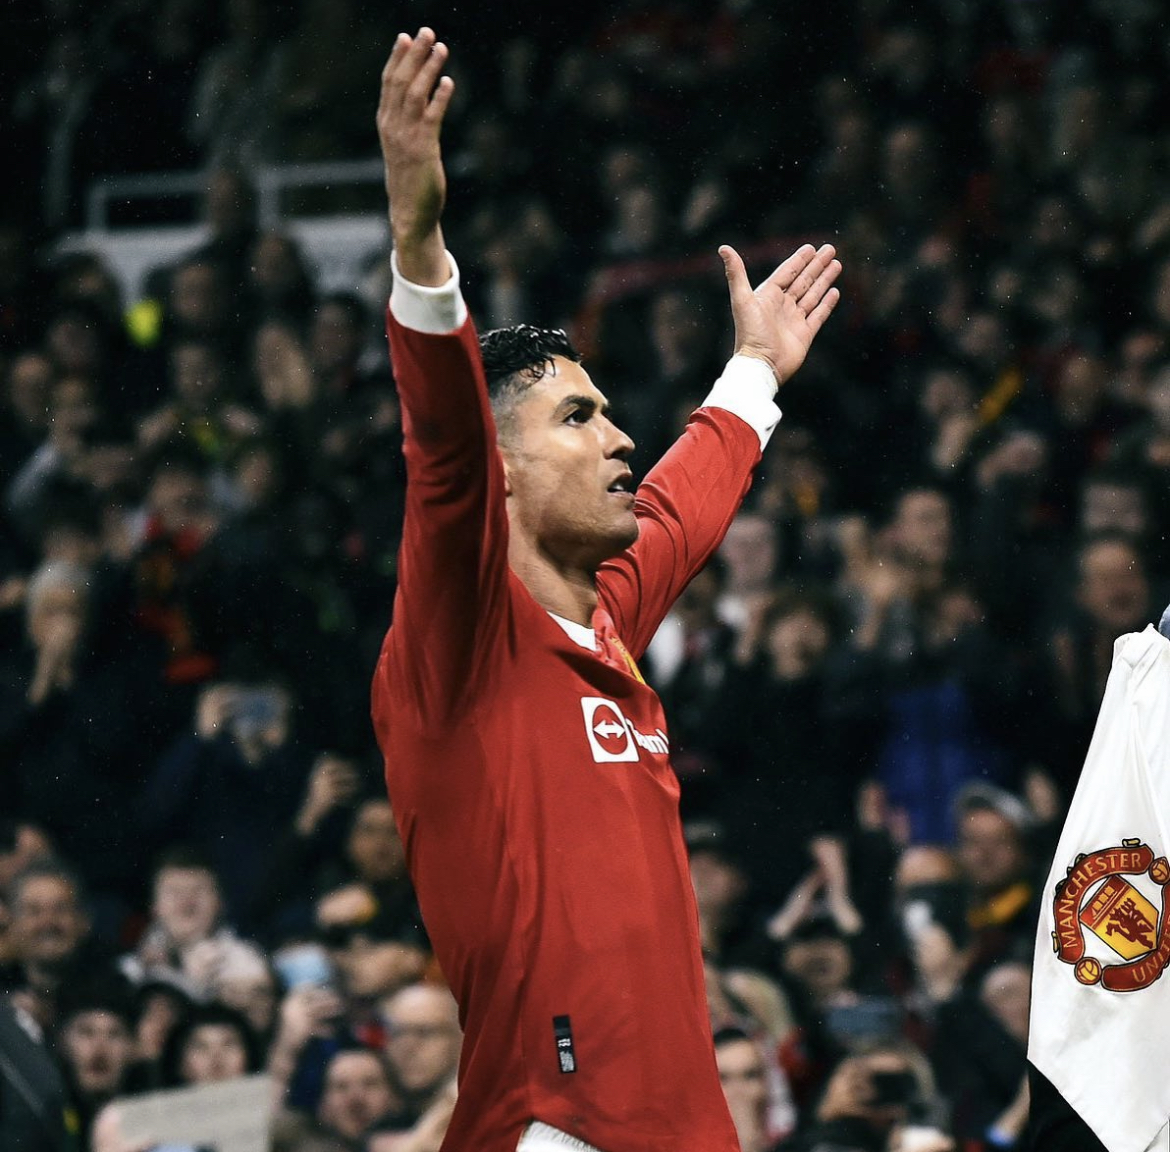 Cristiano Ronaldo May Want to Leave United this Summer